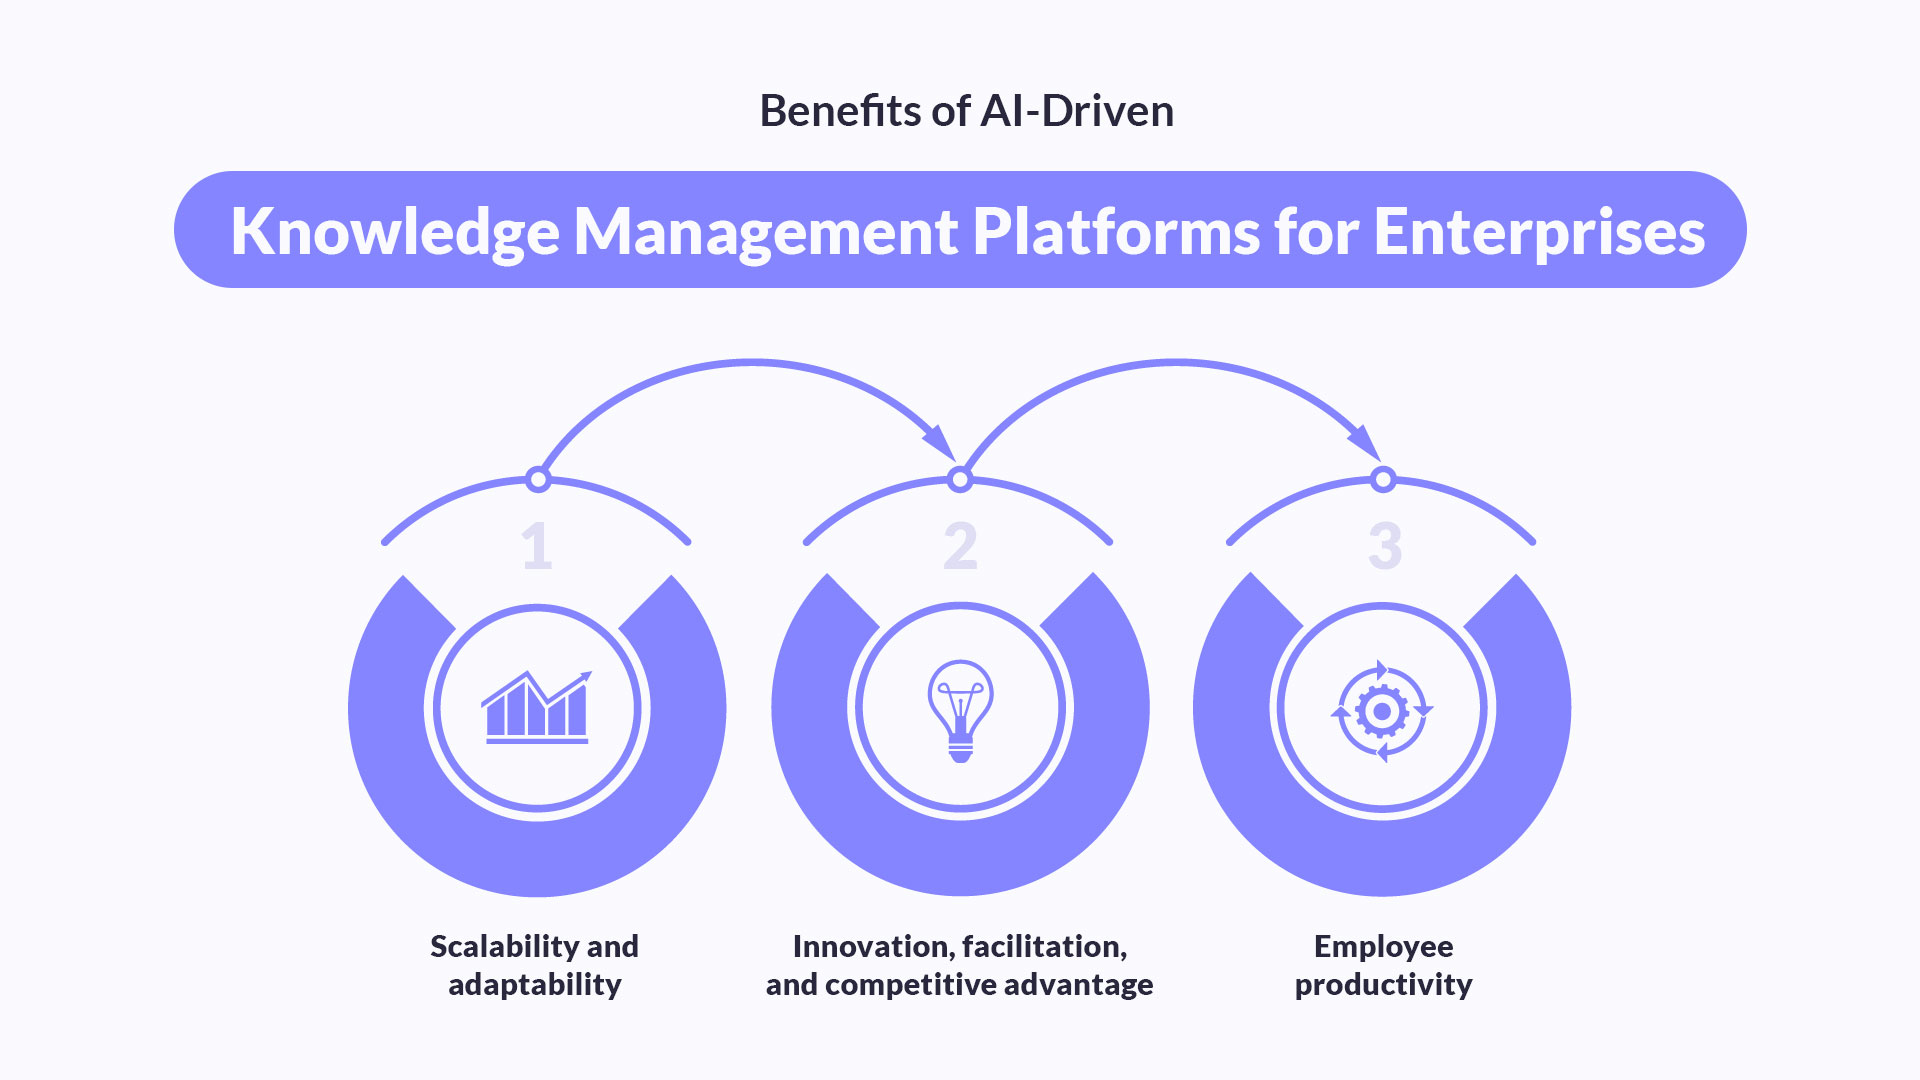 Benefits of artificial intelligence knowledge management